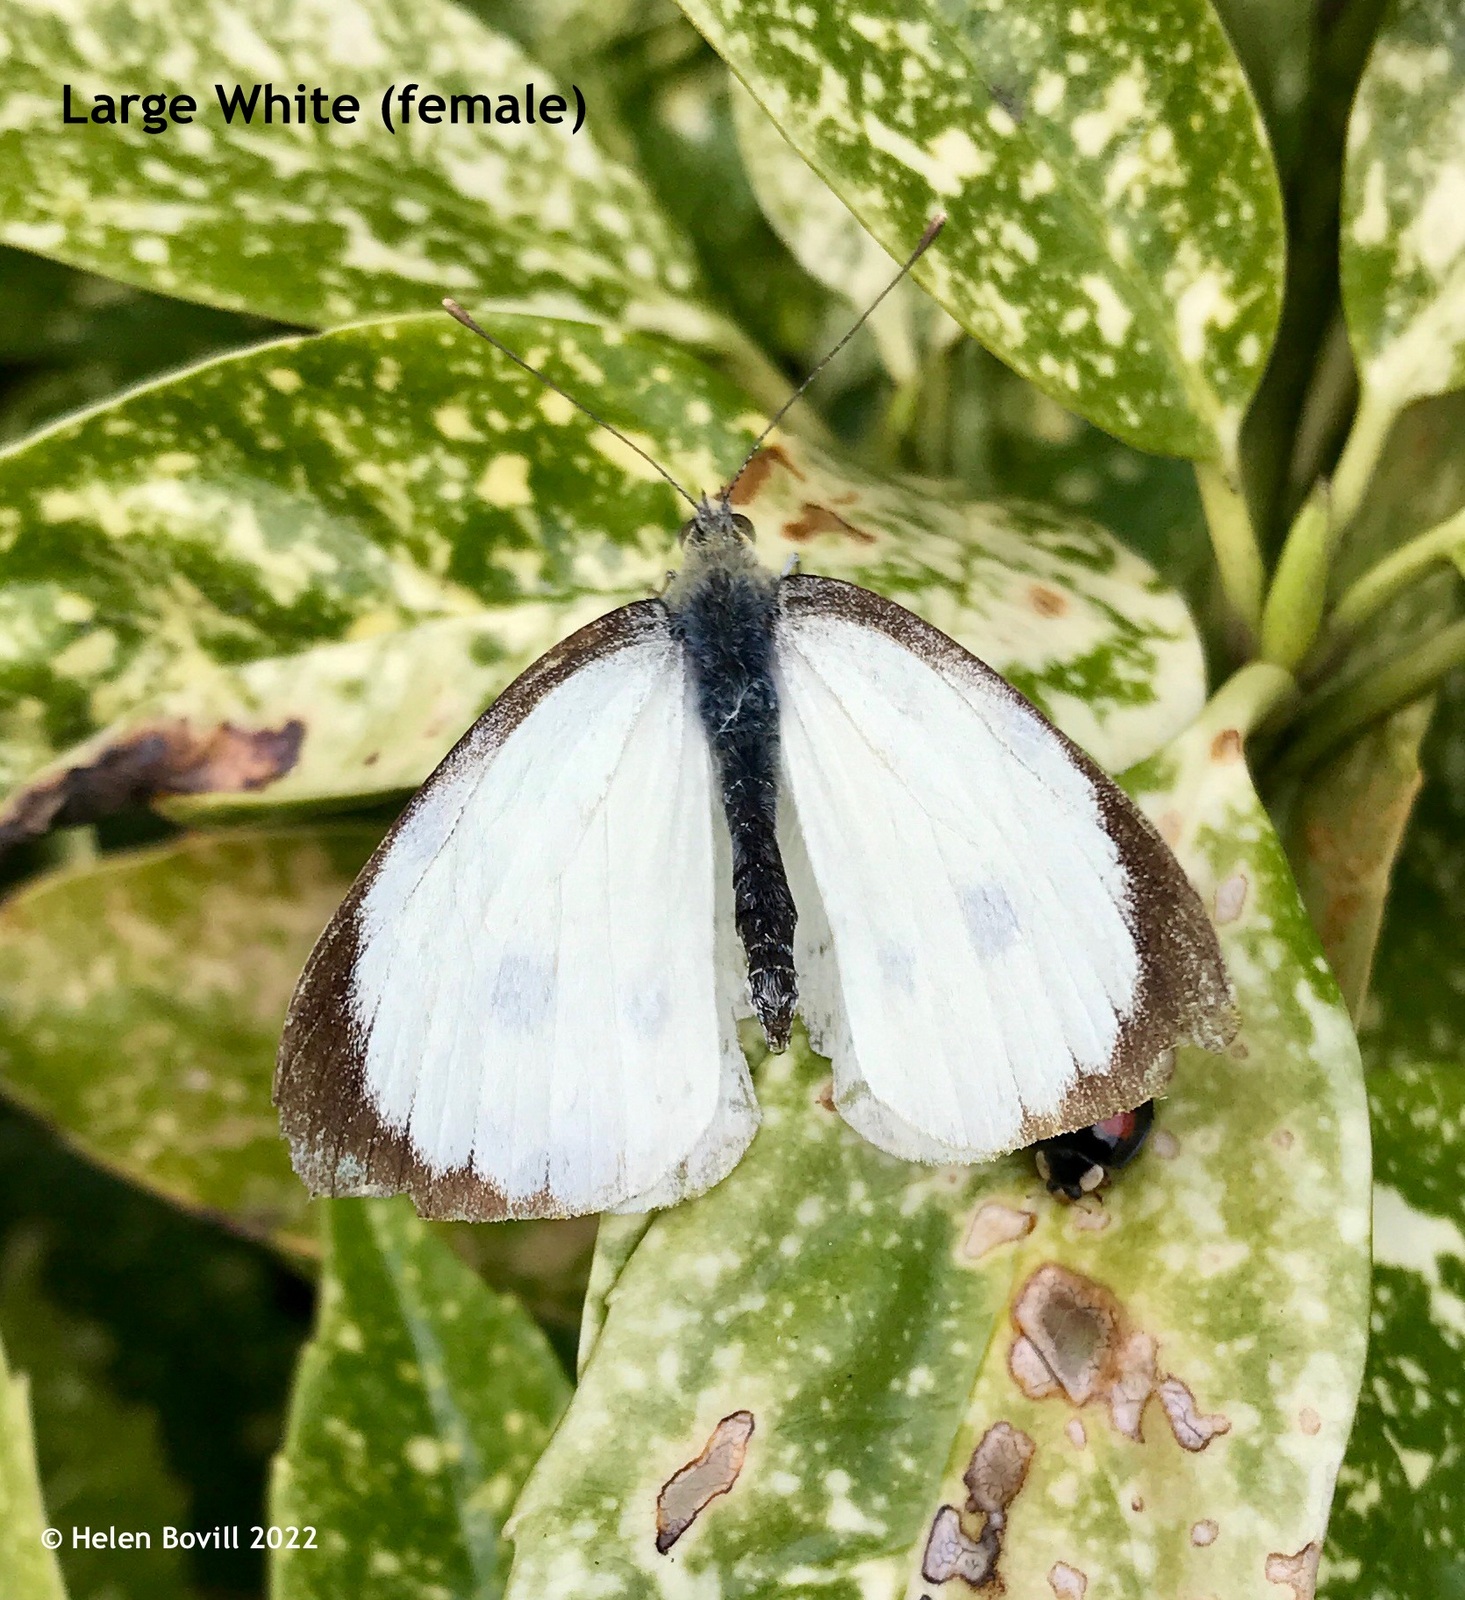 Female Large White Butterfly